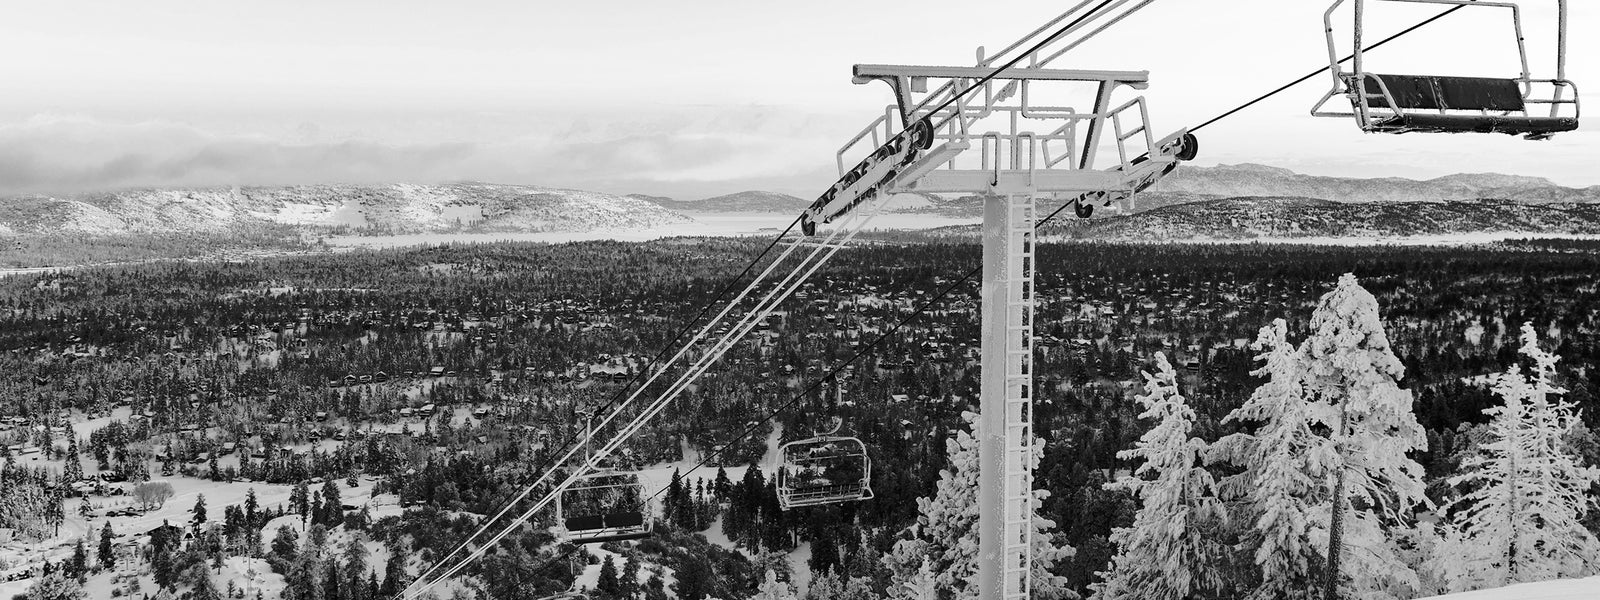 I Spent 7 Straight Hours on a Chairlift. Here’s What I Learned About ...